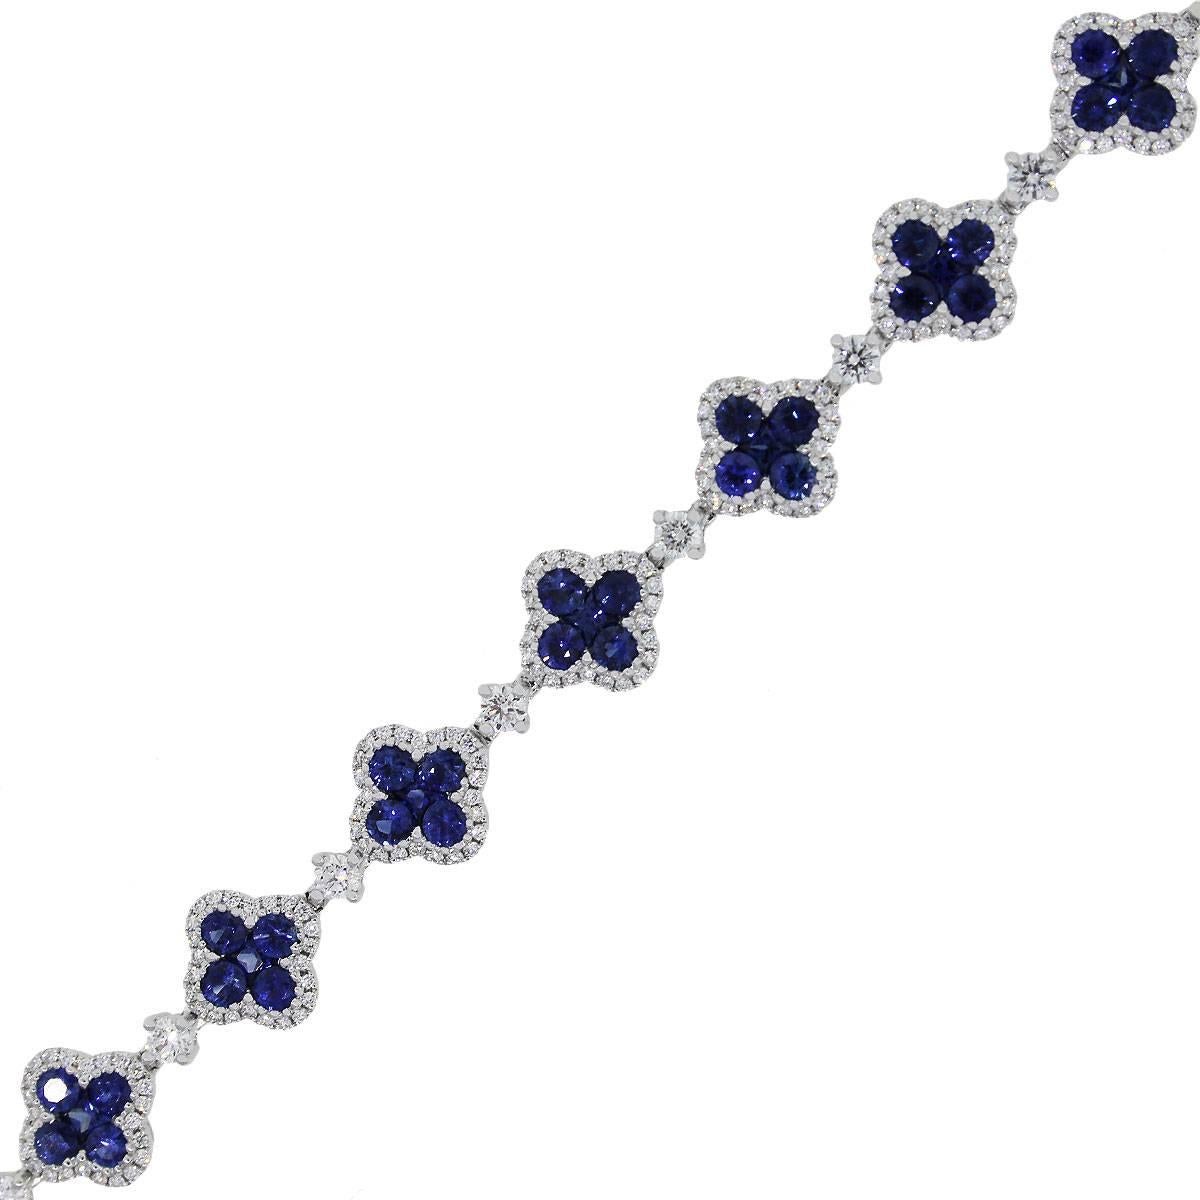 Material: 18k white gold
Gemstone Details: Approximately 6.64ctw of sapphire gemstones.
Diamond Details: Approximately 2.04ctw round brilliant cut diamonds. Diamonds are G/H in color and VS in clarity.
Clasp: Tongue in box clasp with safety